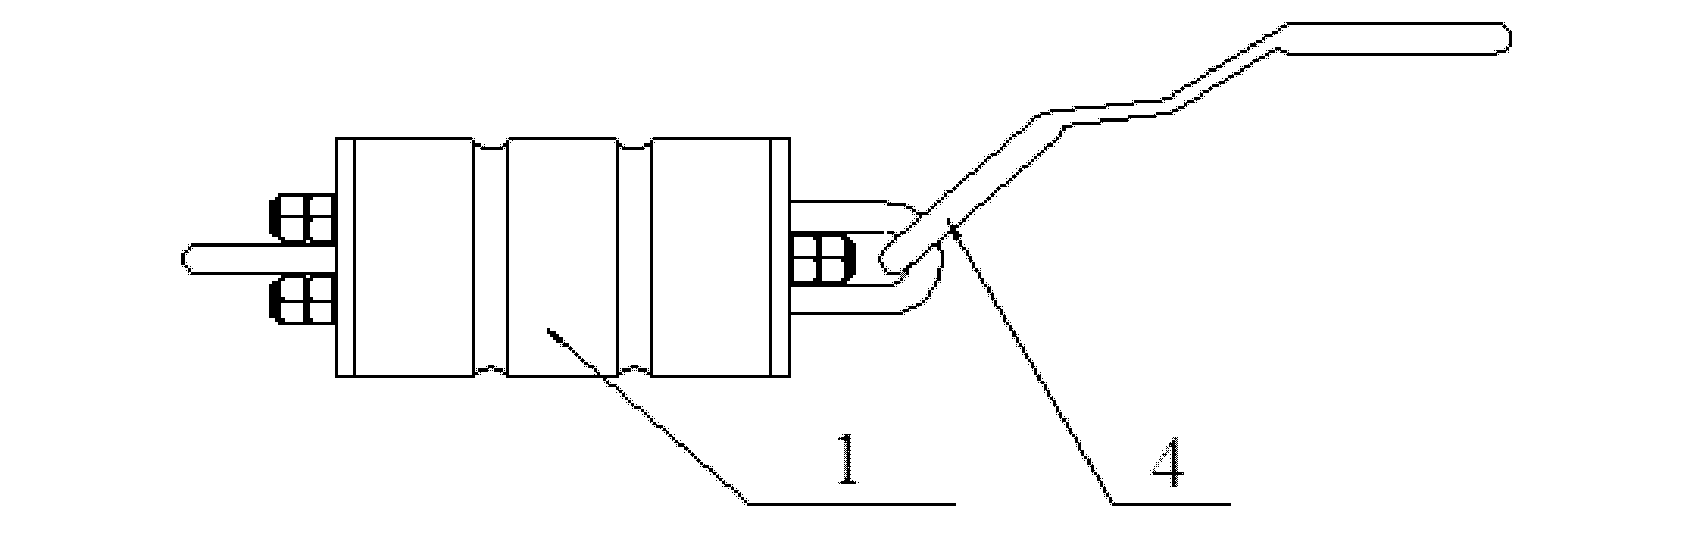 A device to reduce buffer force